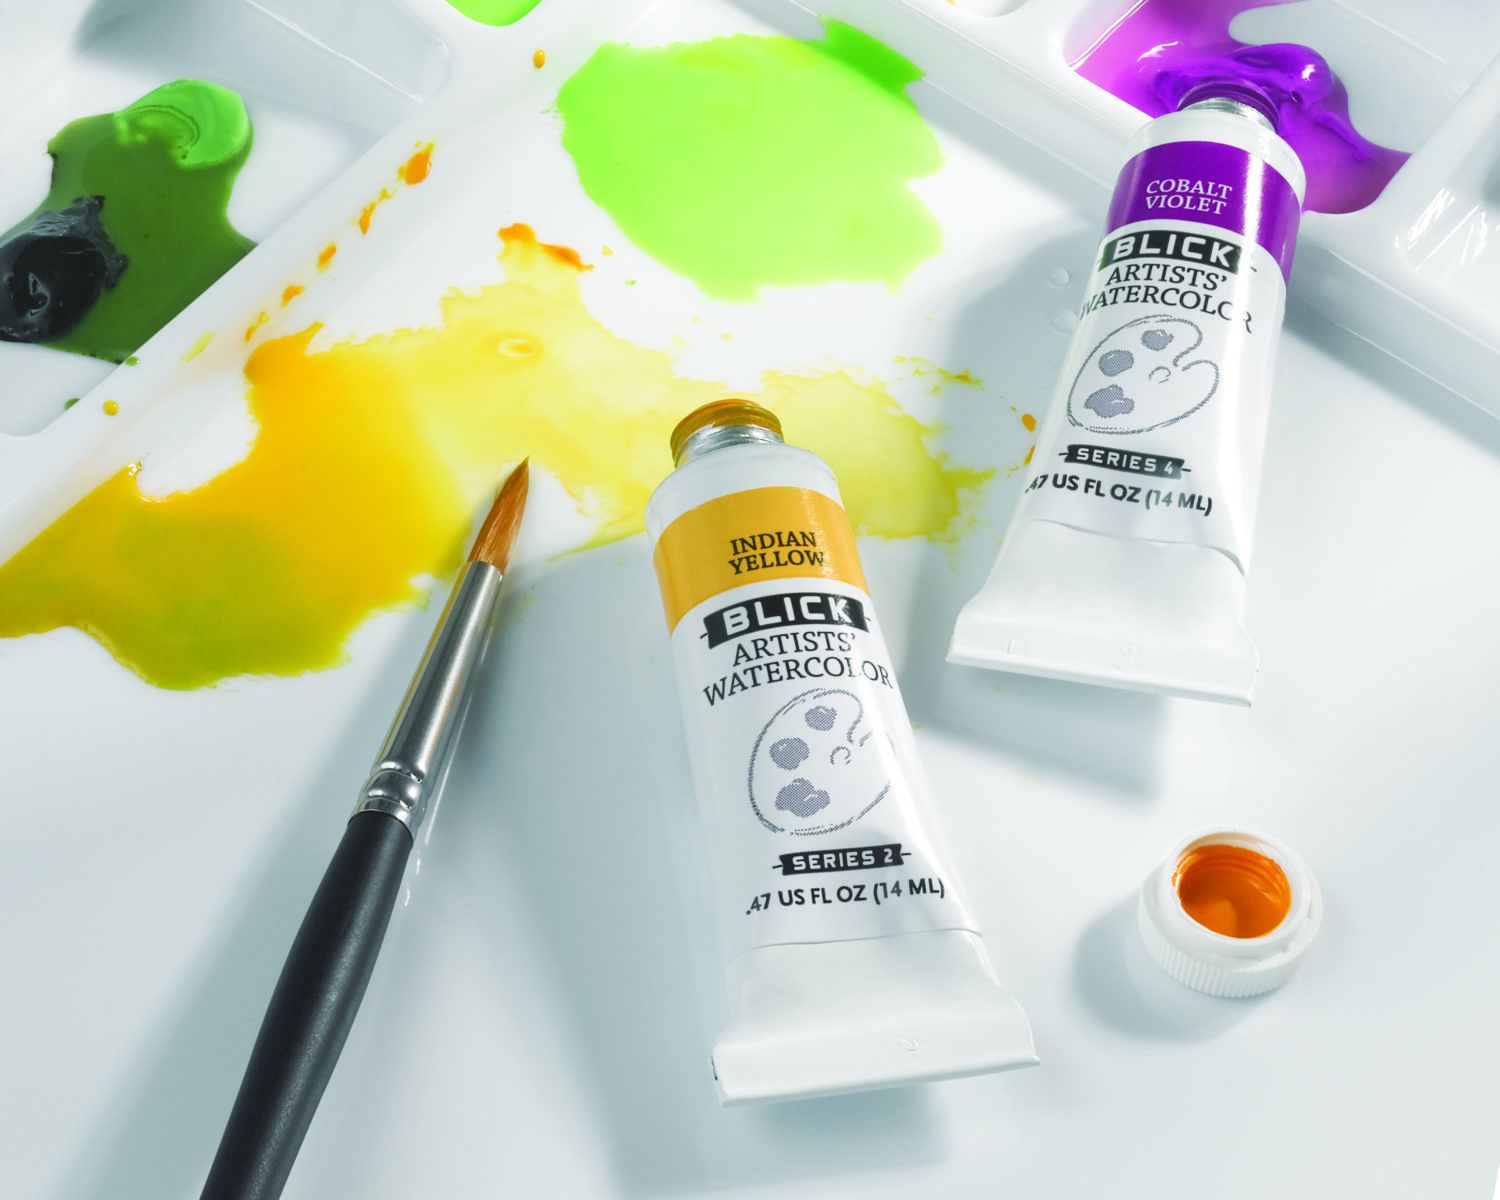 Watercolor Art Supplies | The Latest Pencils, Paints, Kits And More